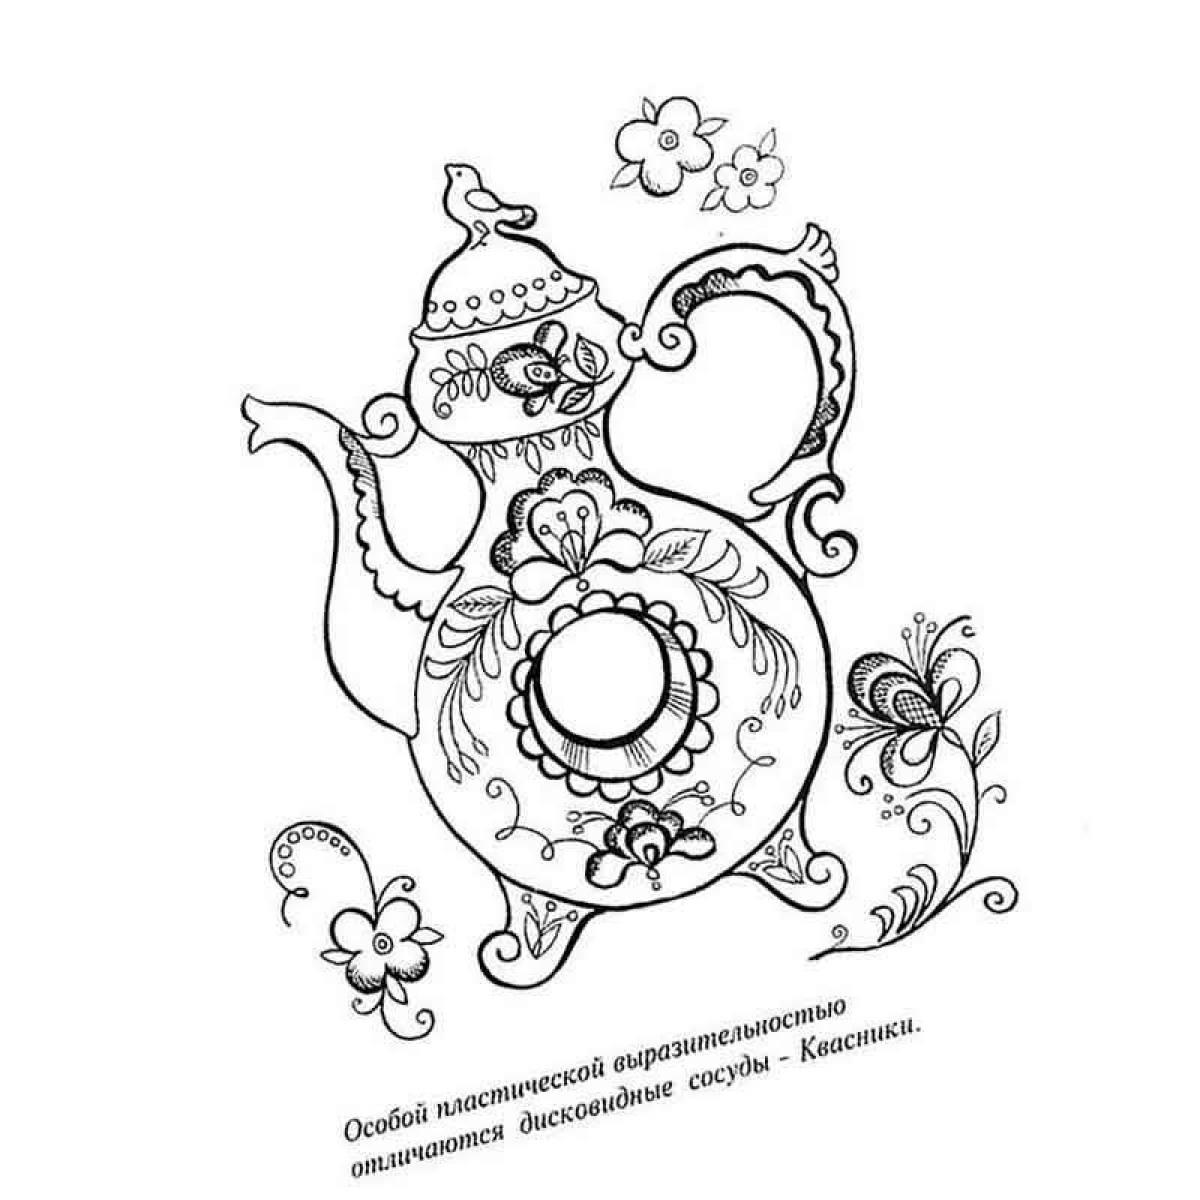 Great Gzhel coloring book for beginners